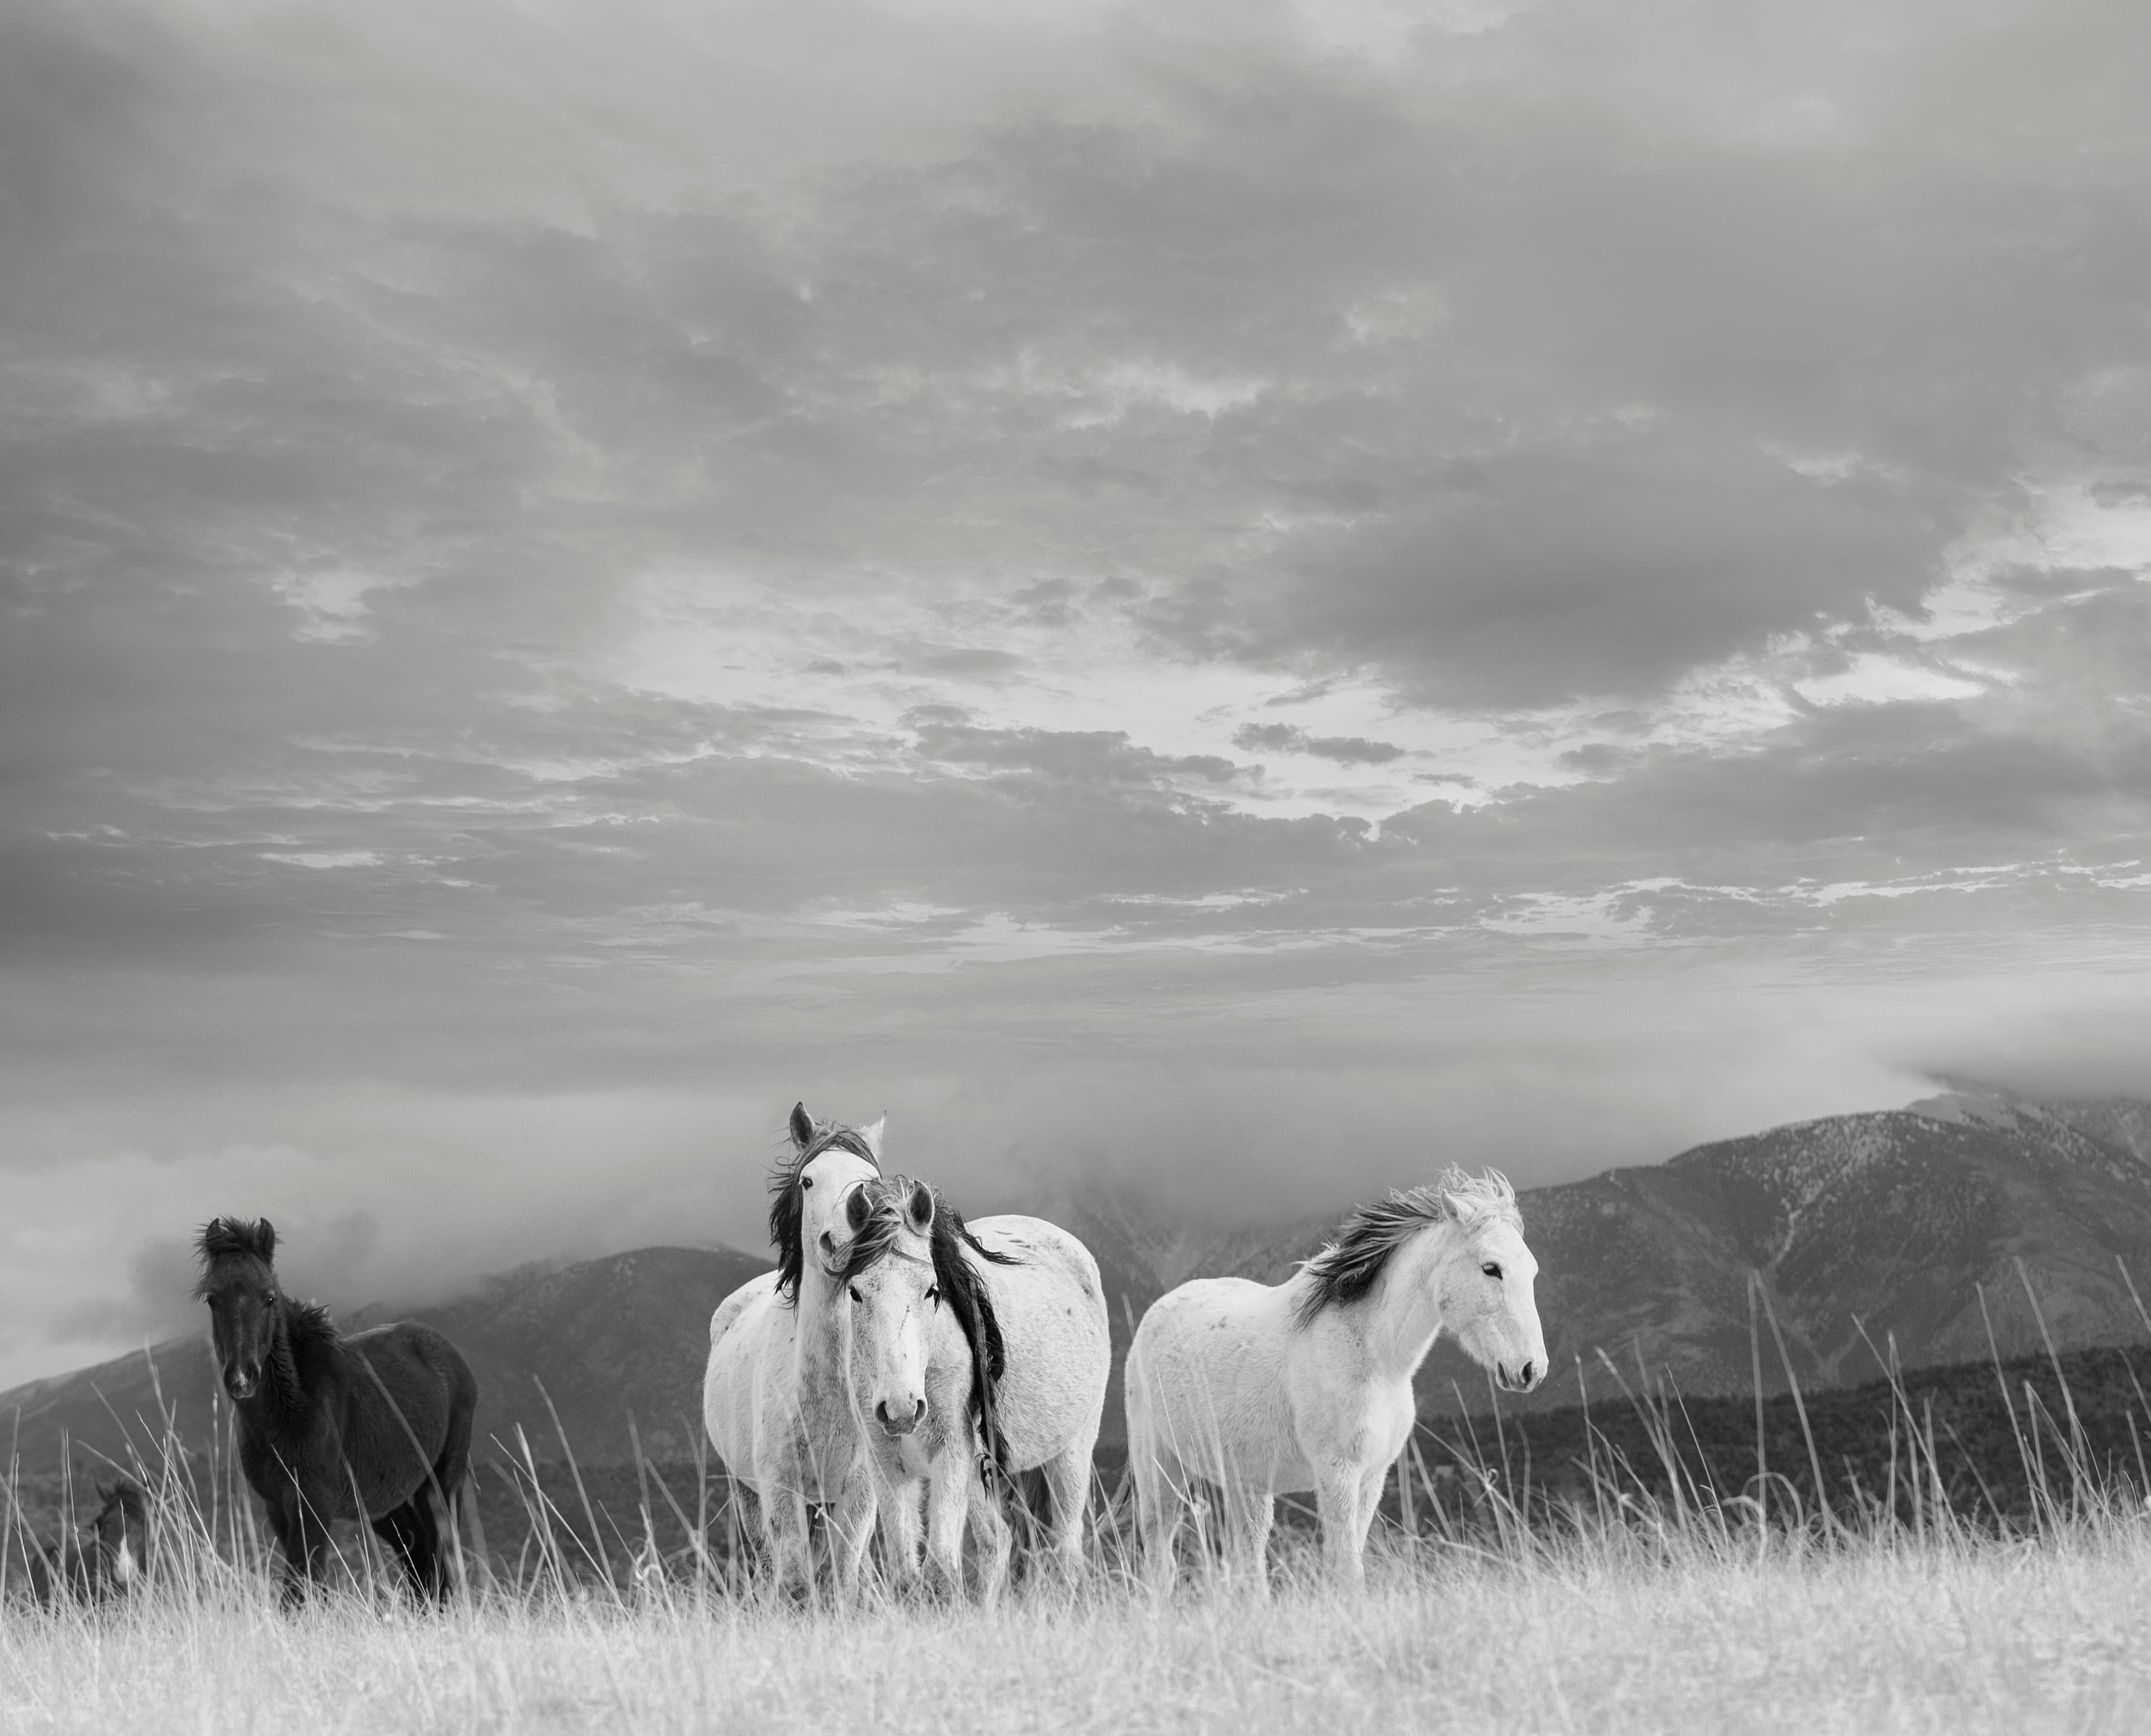 This is a contemporary black and white photograph of a American Wild Mustangs. 
"They represent the ultimate expression of American freedom"
30 x 20 Edition of 50. Signed by artist. 
Framing available. Inquire for rates. 

"I AM CAPTIVATED BY THE